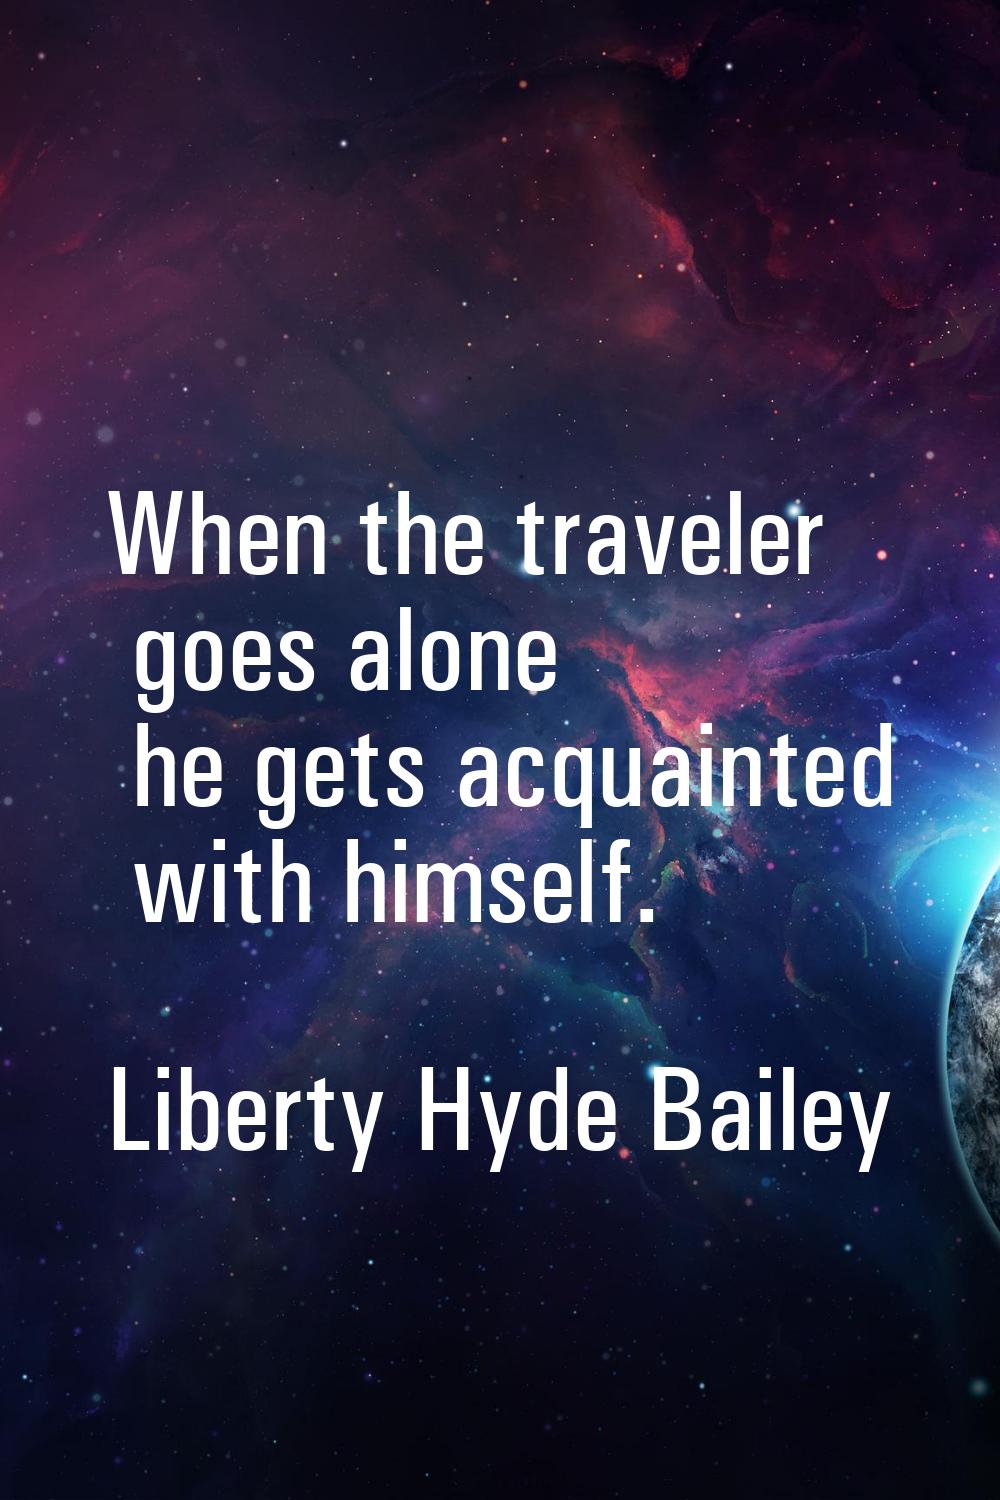 When the traveler goes alone he gets acquainted with himself.